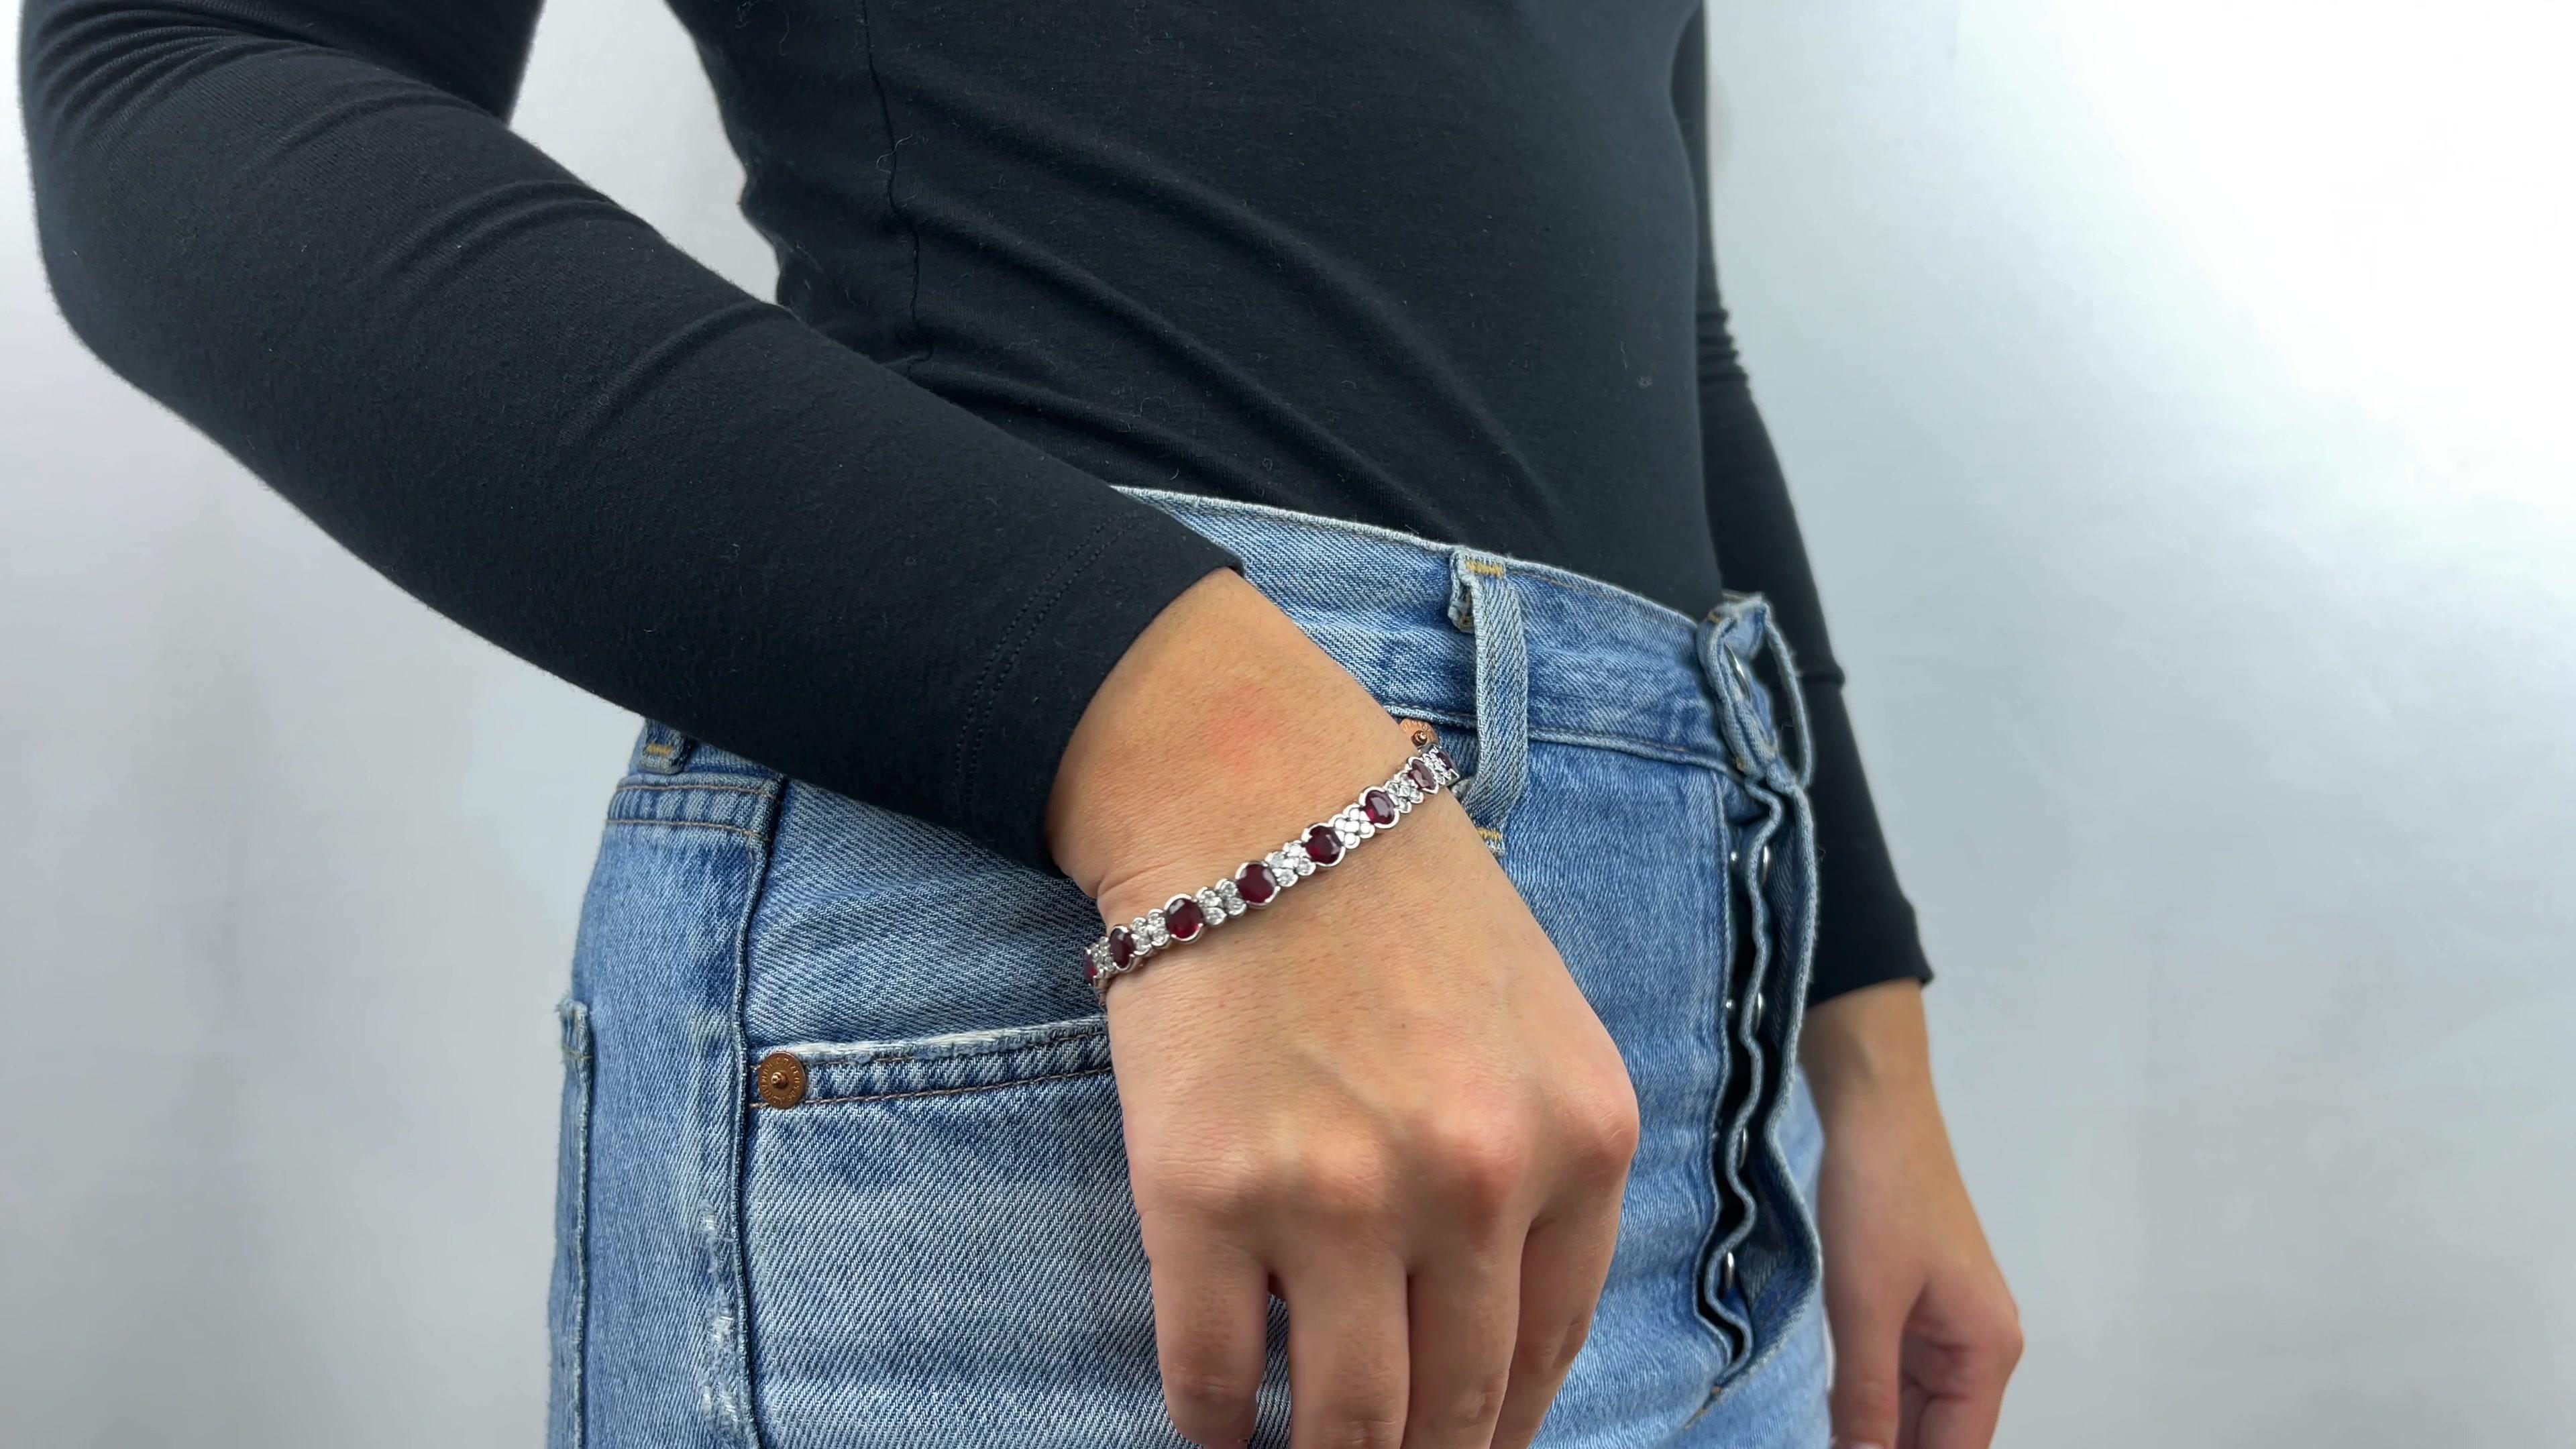 One Vintage GIA Burma Ruby Diamond Platinum Bracelet. Featuring seventeen GIA certified, natural, oval cut rubies accompanied with certificate #1226096186 stating the rubies are of Burma origin and have been heated. Accented by 68 round brilliant